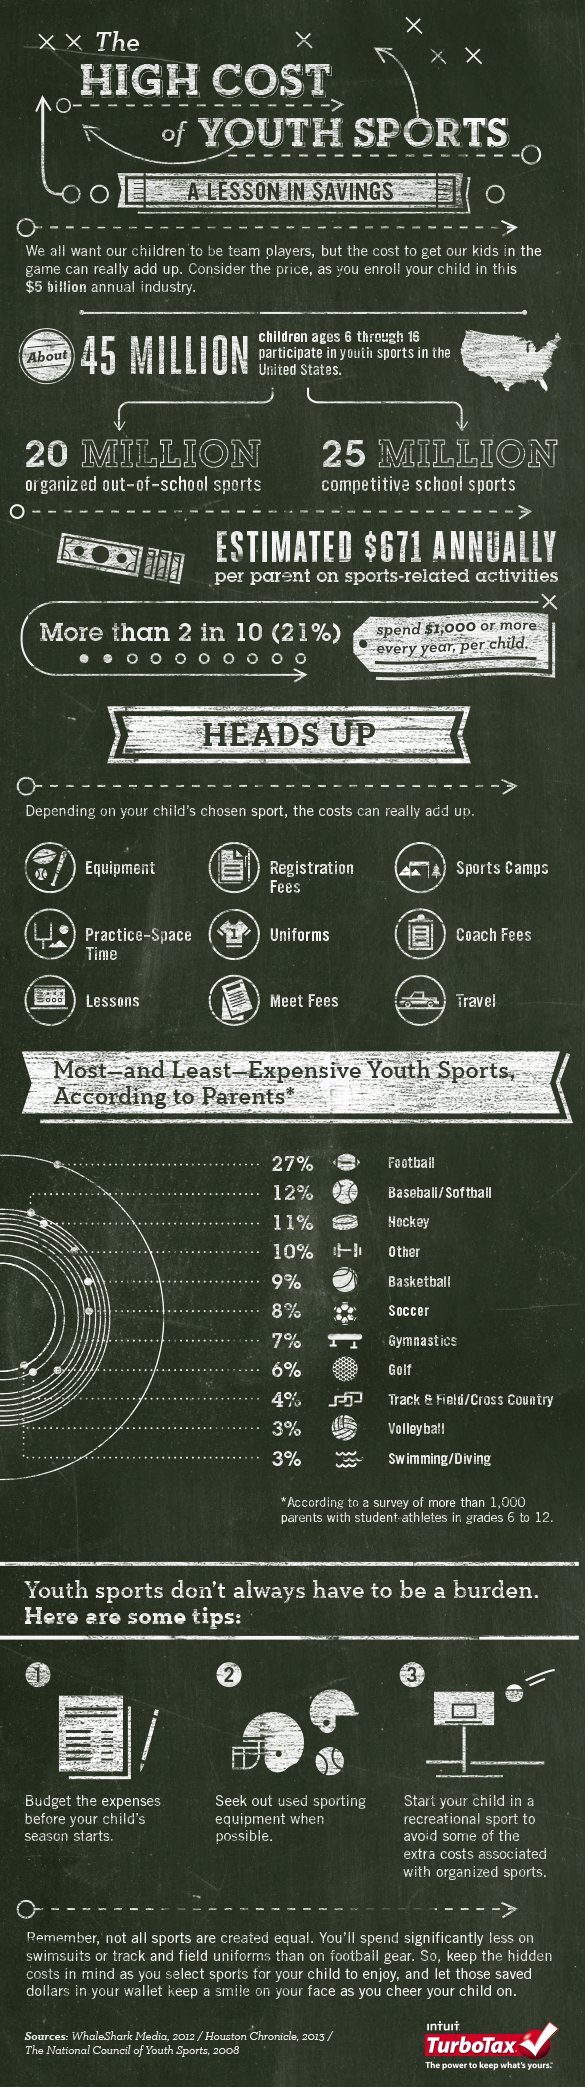 High-Cost-of-Youth-Sports